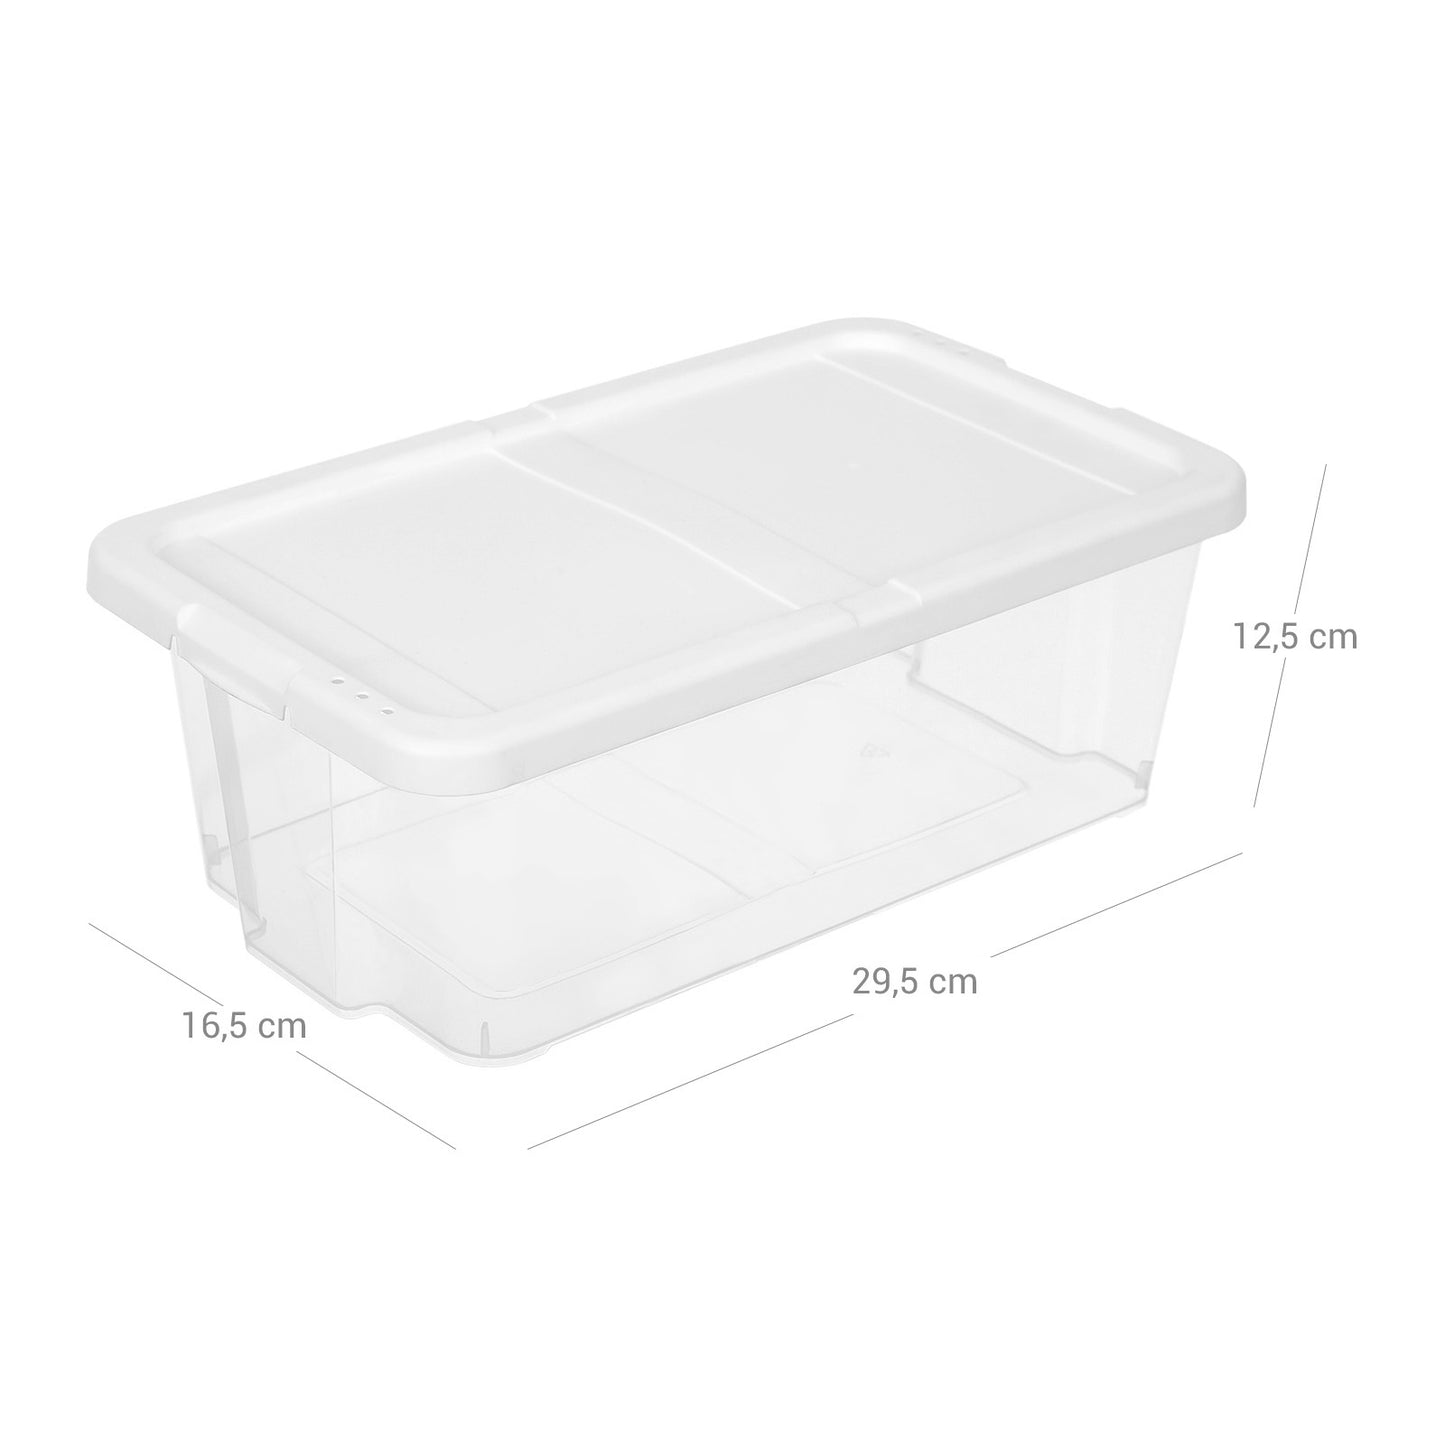 12 Set Shoe Boxes with Lids, Clear Transparent Stackable Versatile Storage Organiser, Sizes Up to UK 7.5, SONGMICS, 3